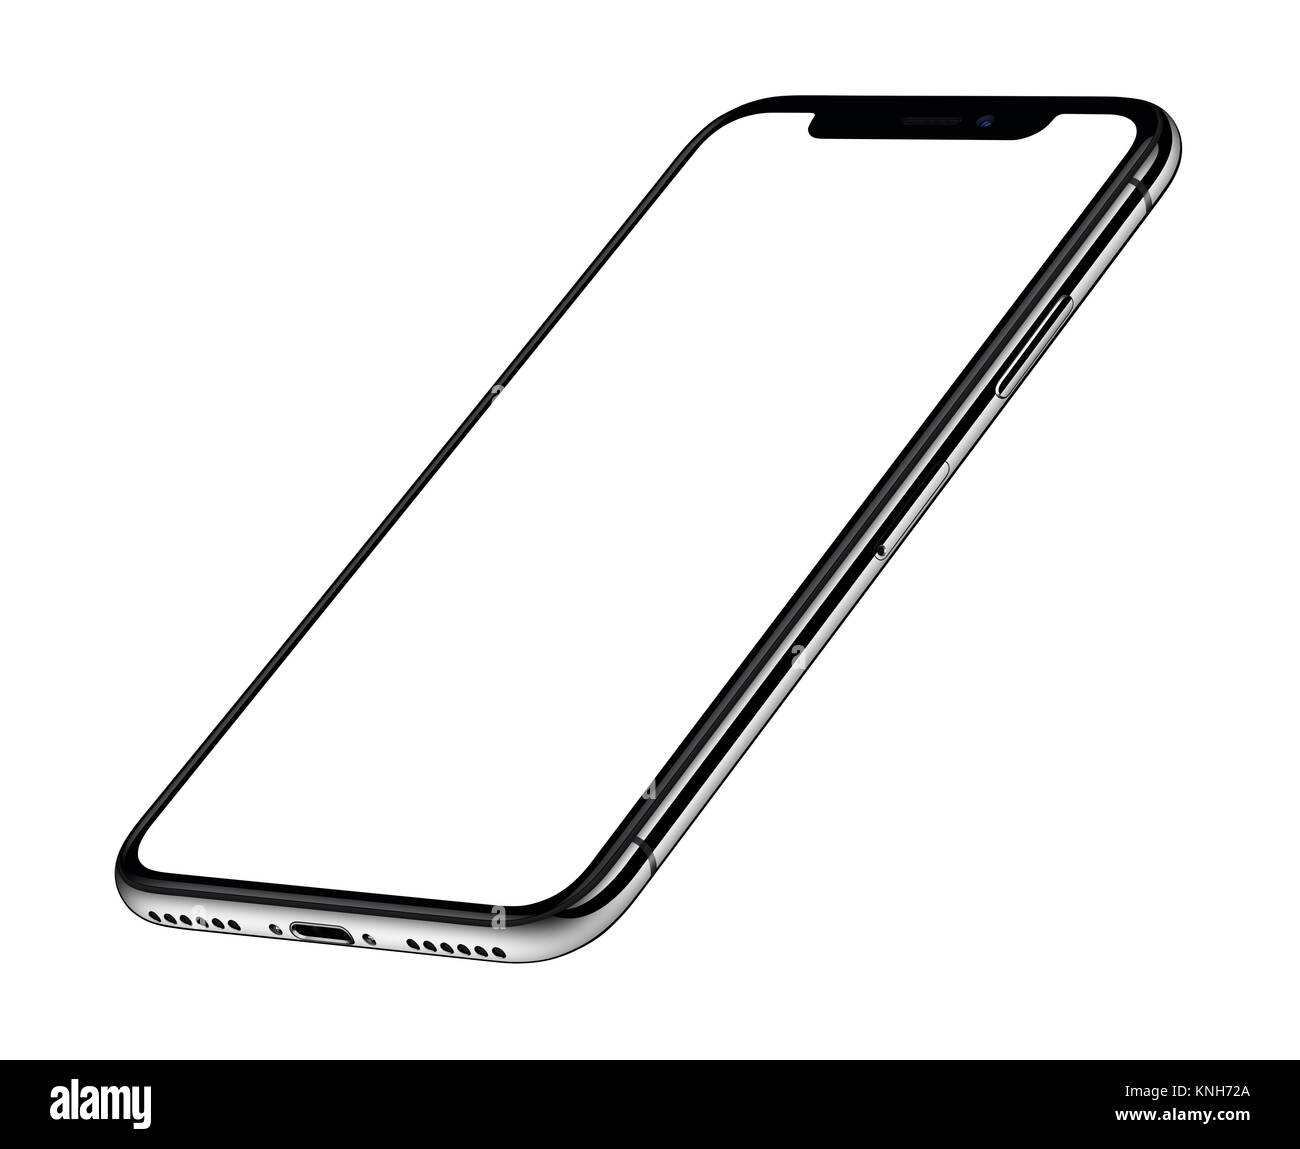 Similar to iPhone X perspective isometric smartphone mockup front side CCW rotated Stock Photo